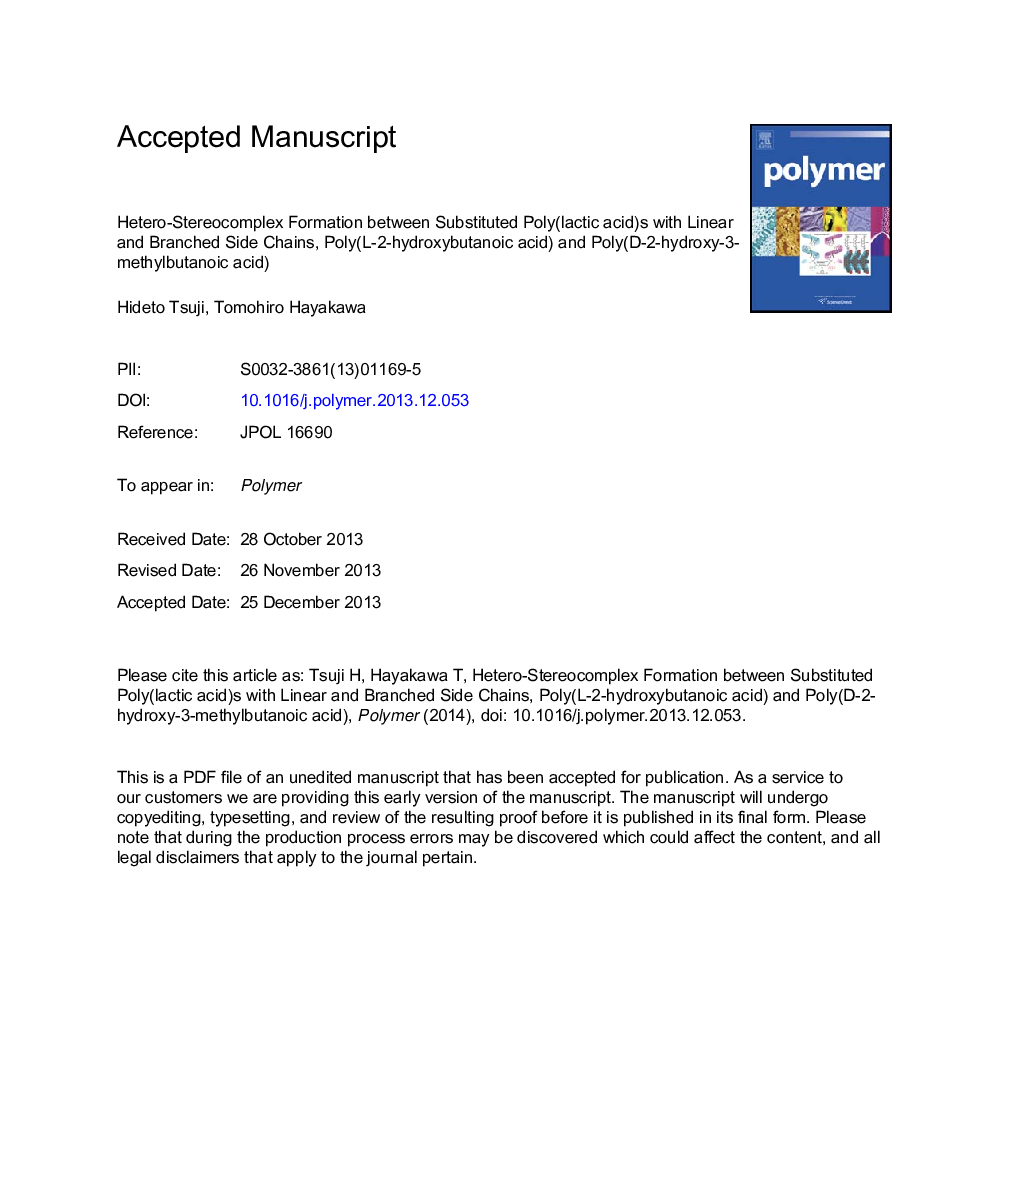 Hetero-stereocomplex formation between substituted poly(lactic acid)s with linear and branched side chains, poly(l-2-hydroxybutanoic acid) and poly(d-2-hydroxy-3-methylbutanoic acid)